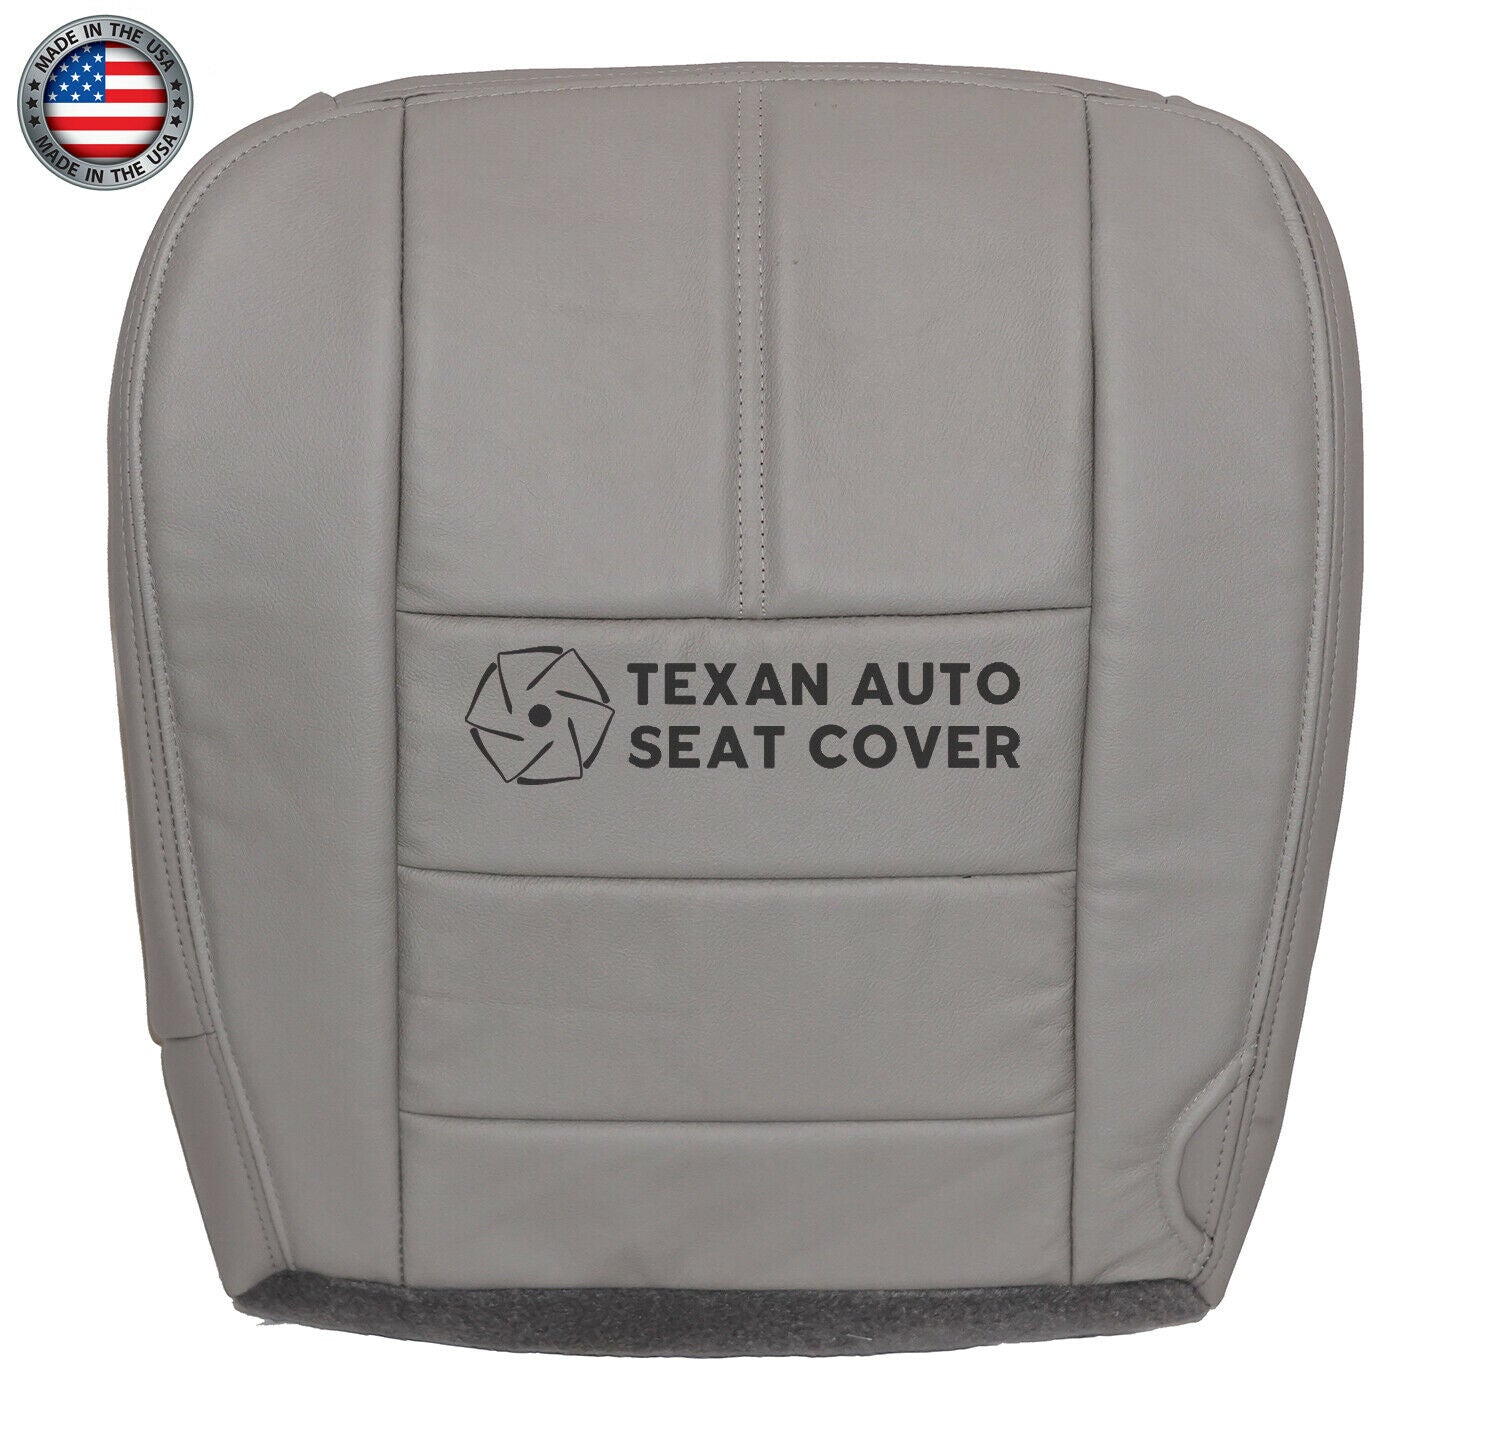 2008, 2009, 2010 Ford F250 F350 F450 F550 Lariat, XLT with Leather Passenger Bottom Leather Seat Cover Gray